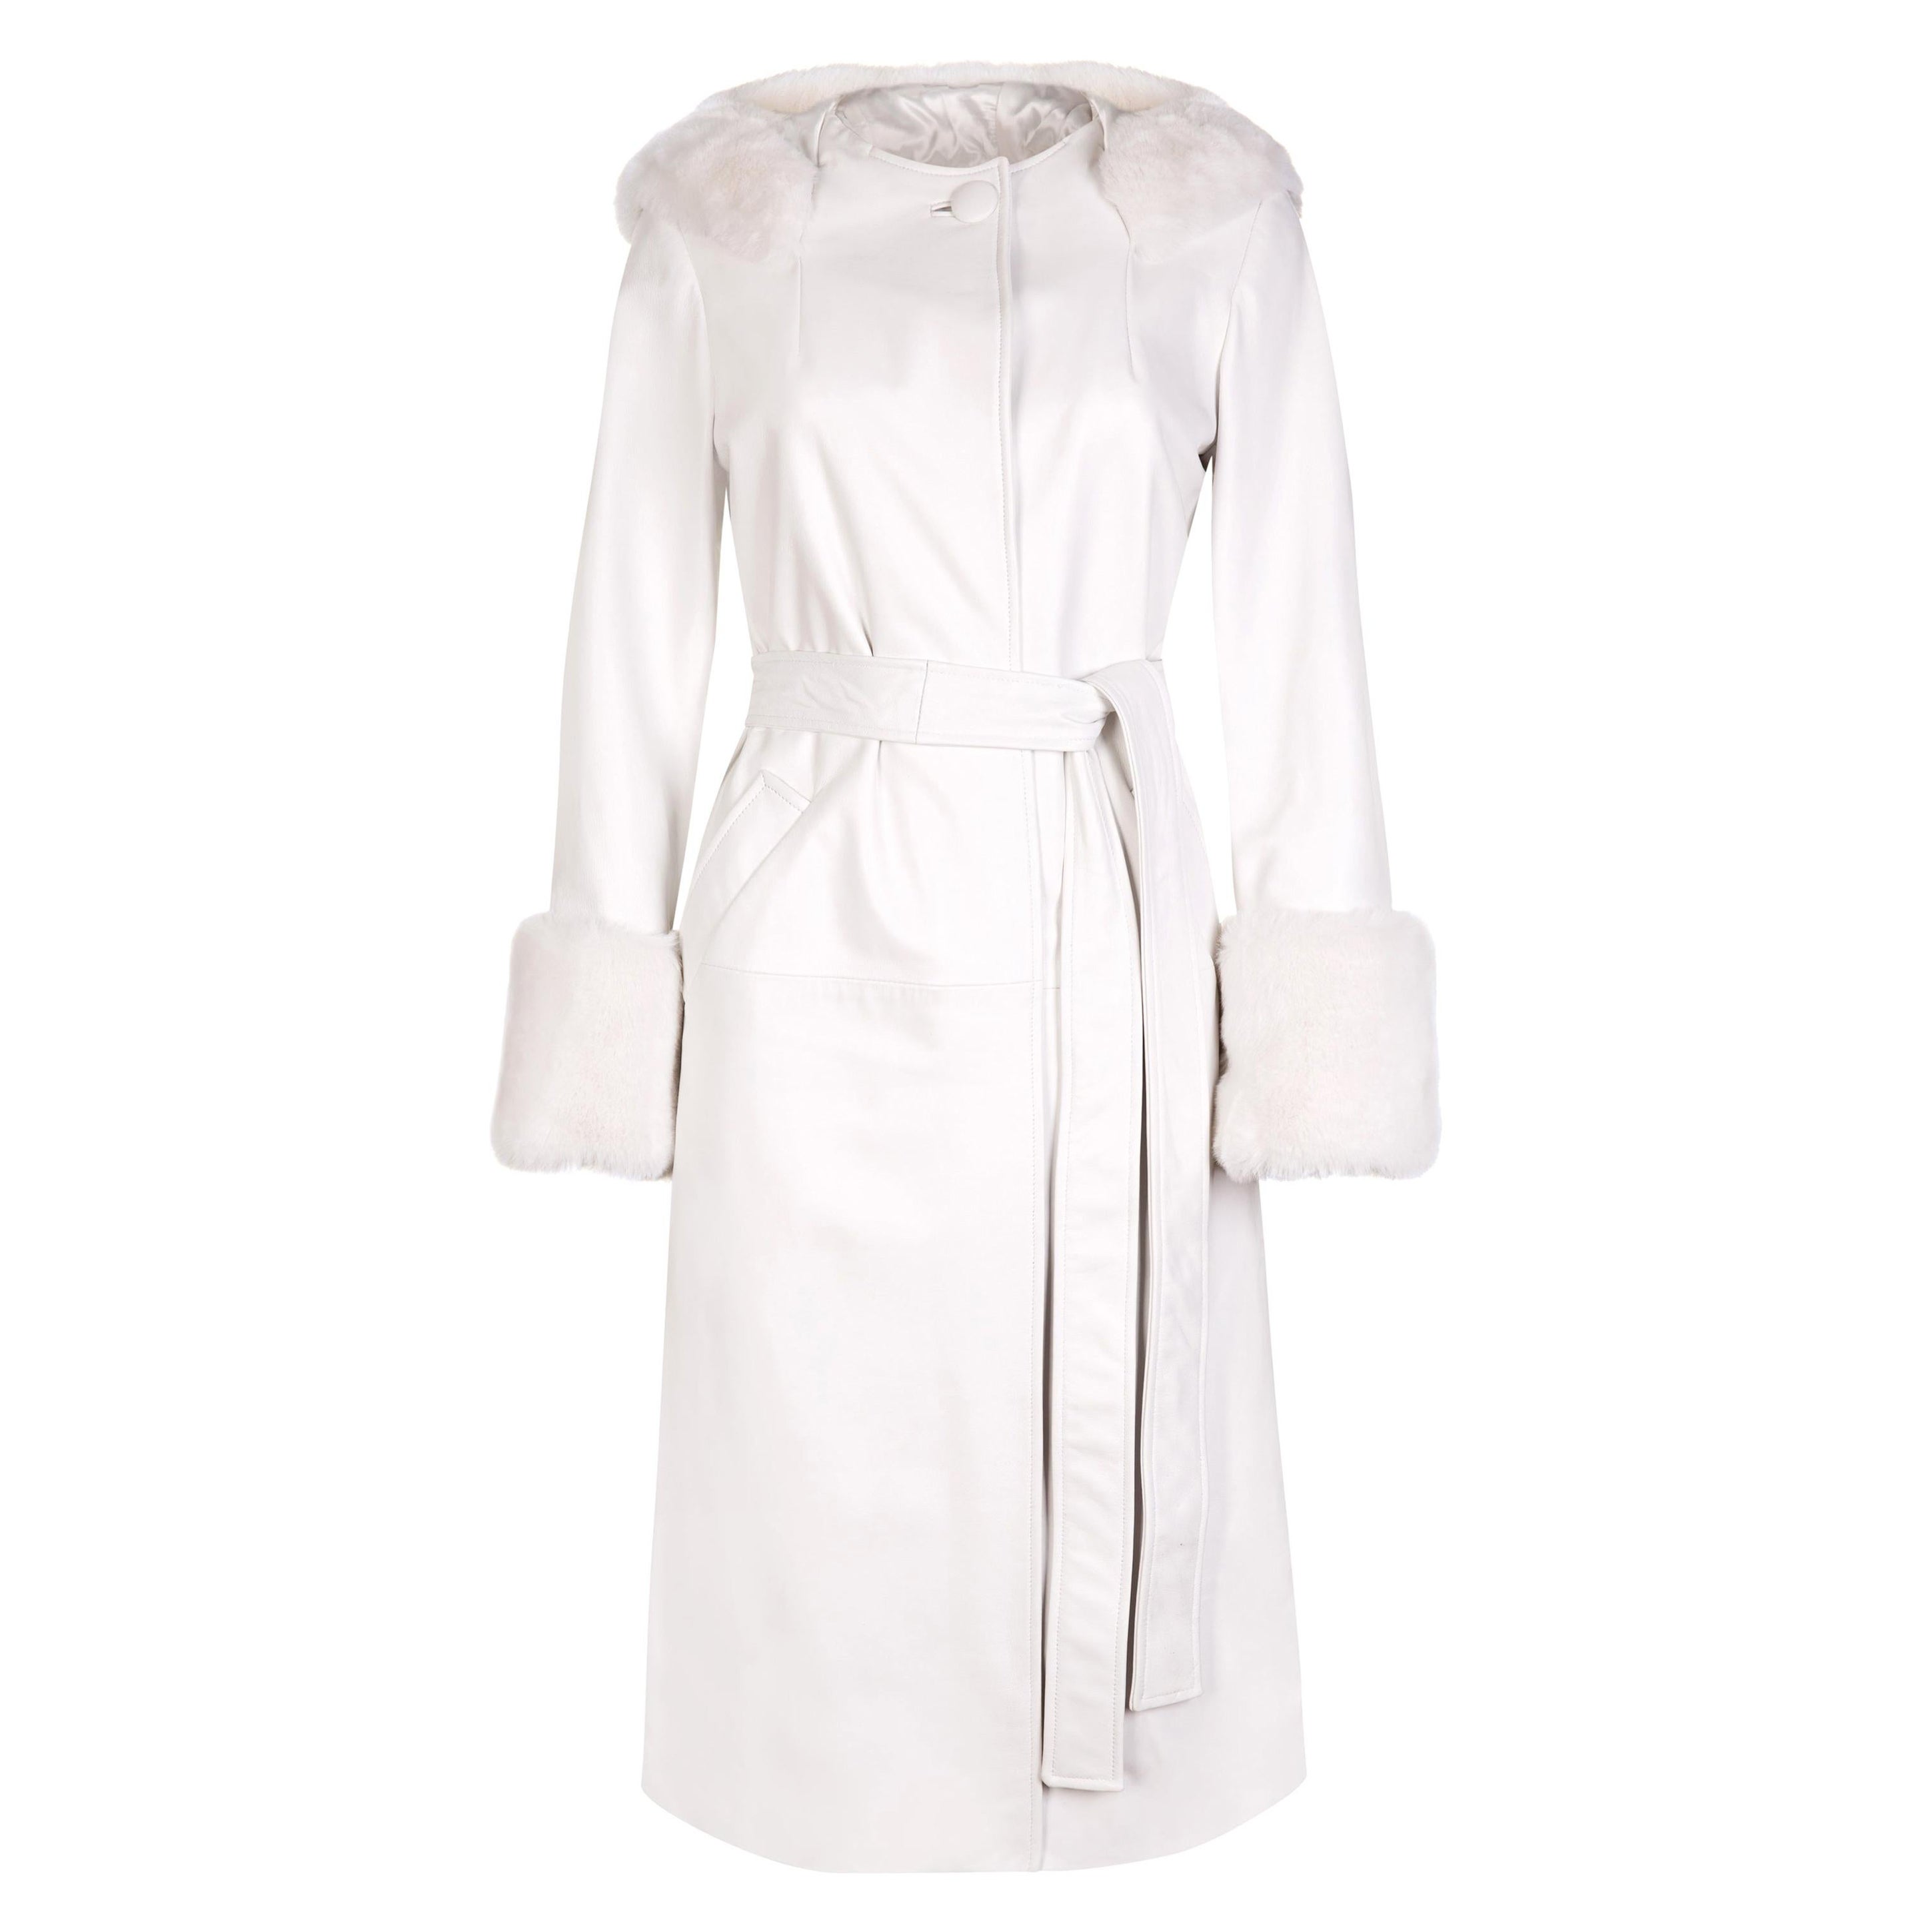 Verheyen Aurora Hooded Leather Trench Coat in White with Faux Fur - Size uk 8 For Sale